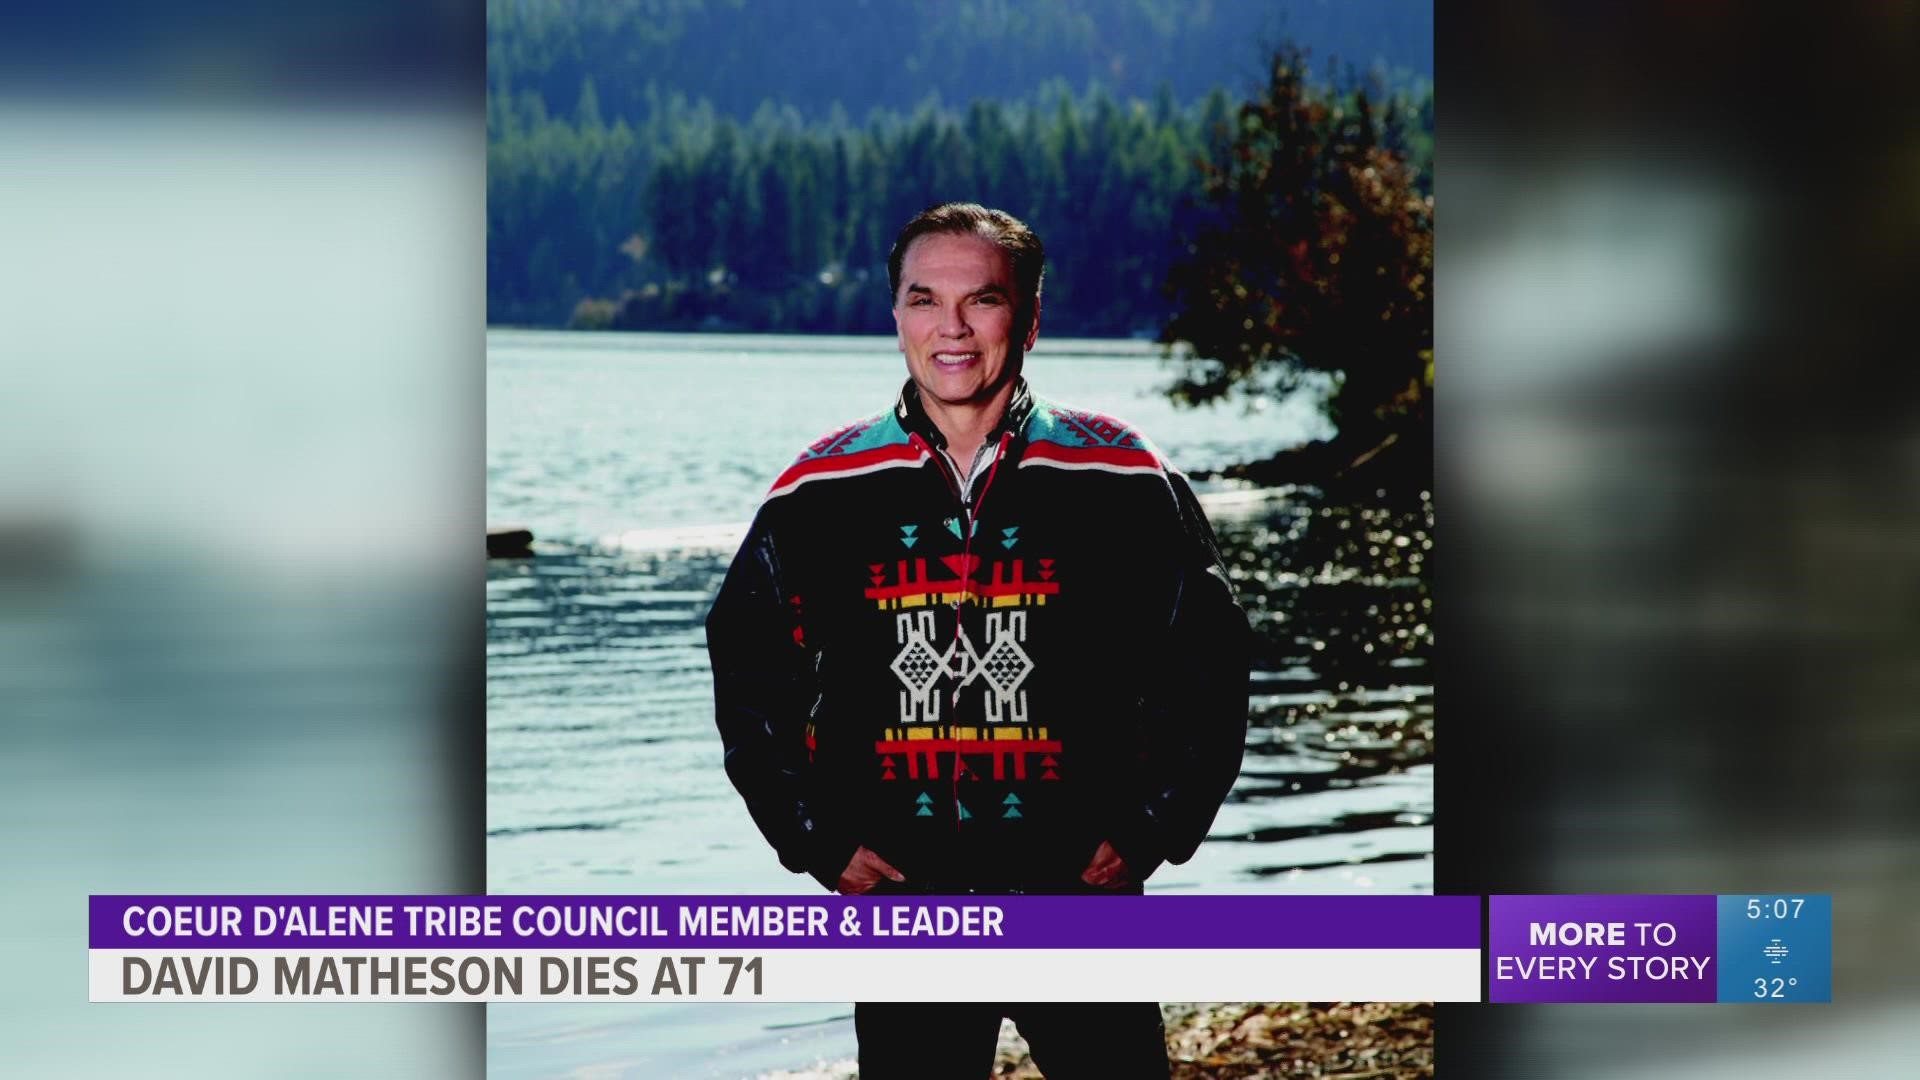 Matheson was a key leader and council member for the Couer d'Alene Tribe. The CDA community is now remembering him for his passion and kind heart.